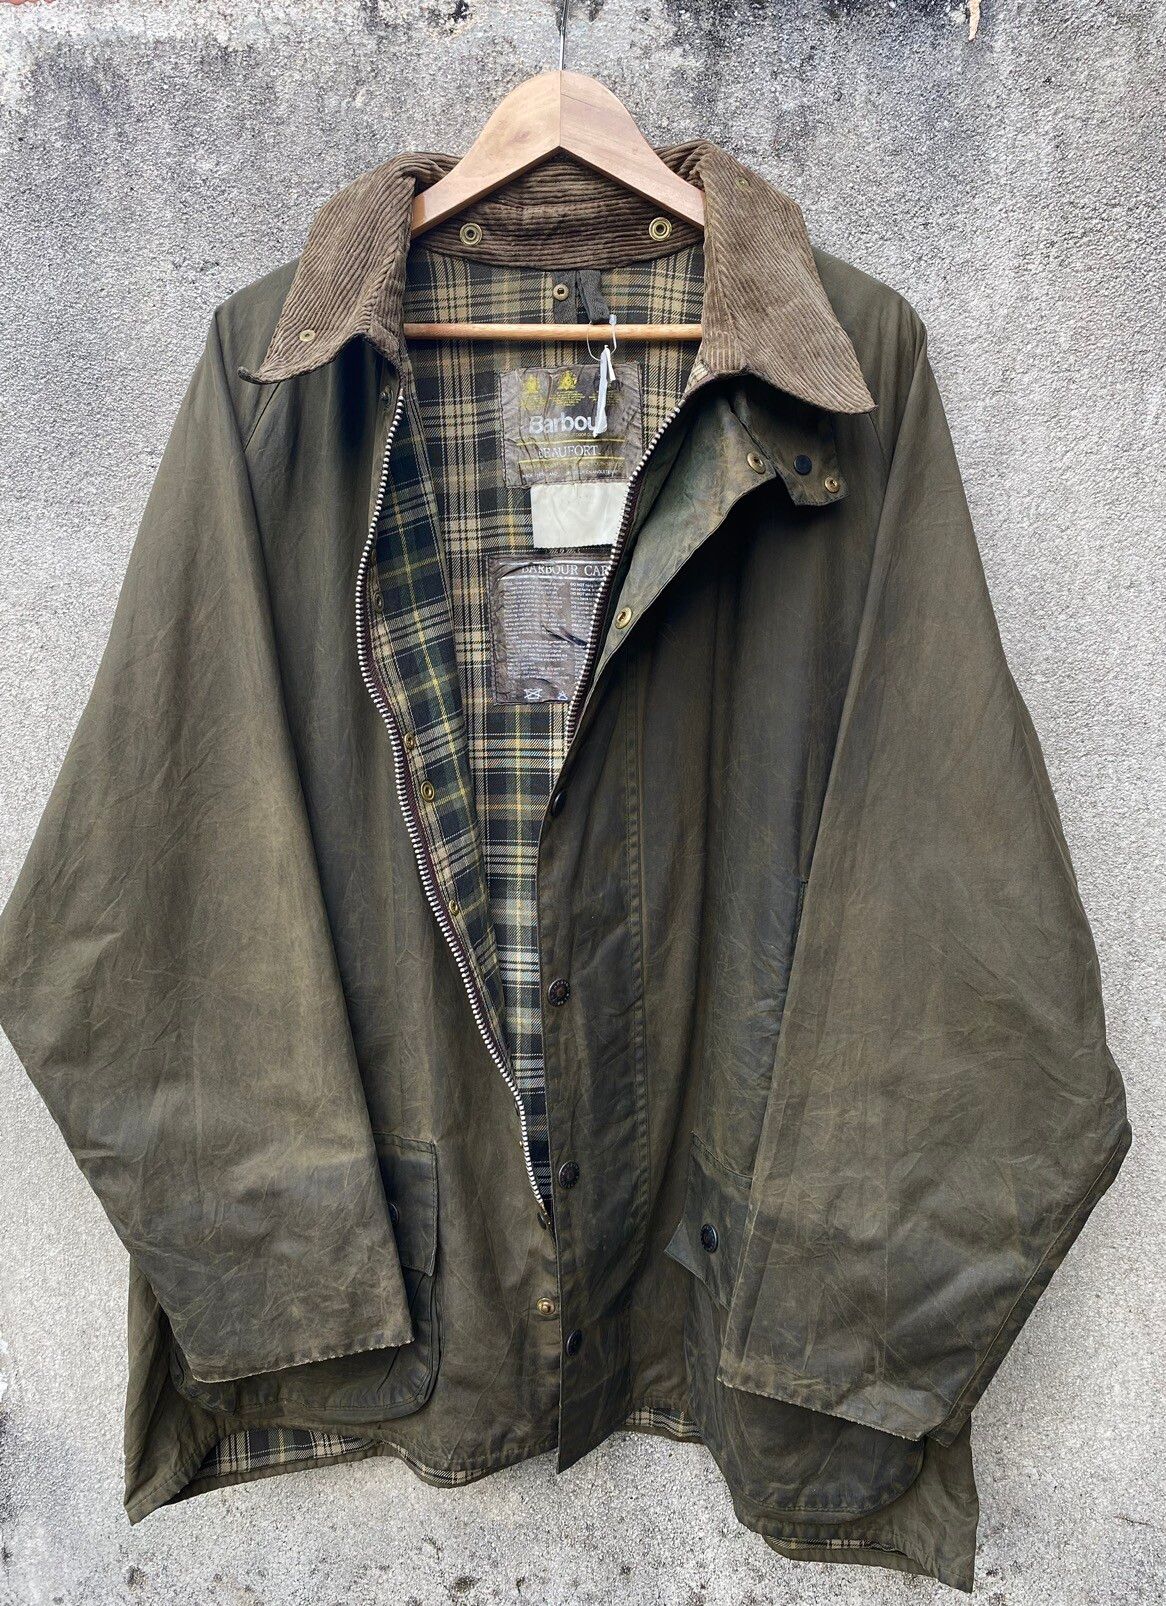 🏴󠁧󠁢󠁥󠁮󠁧󠁿 Vintage Barbour Classic Beaufort Waxed Jacket - 3